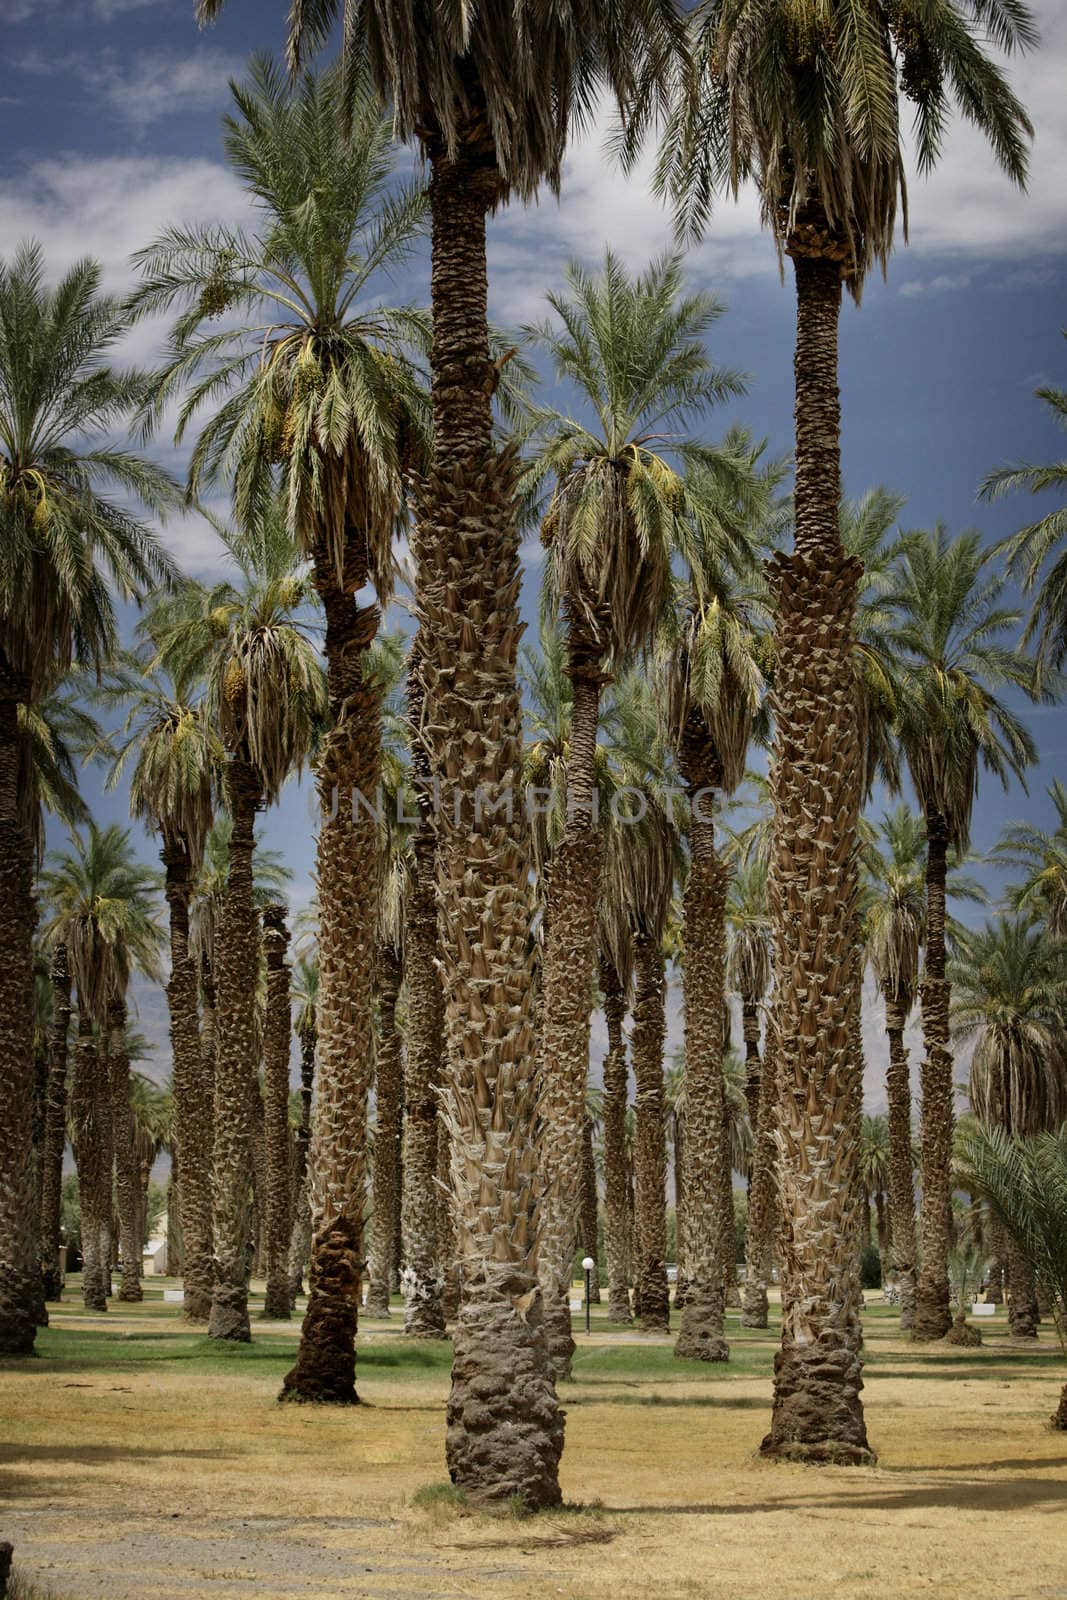 forest of palm trees in the desert